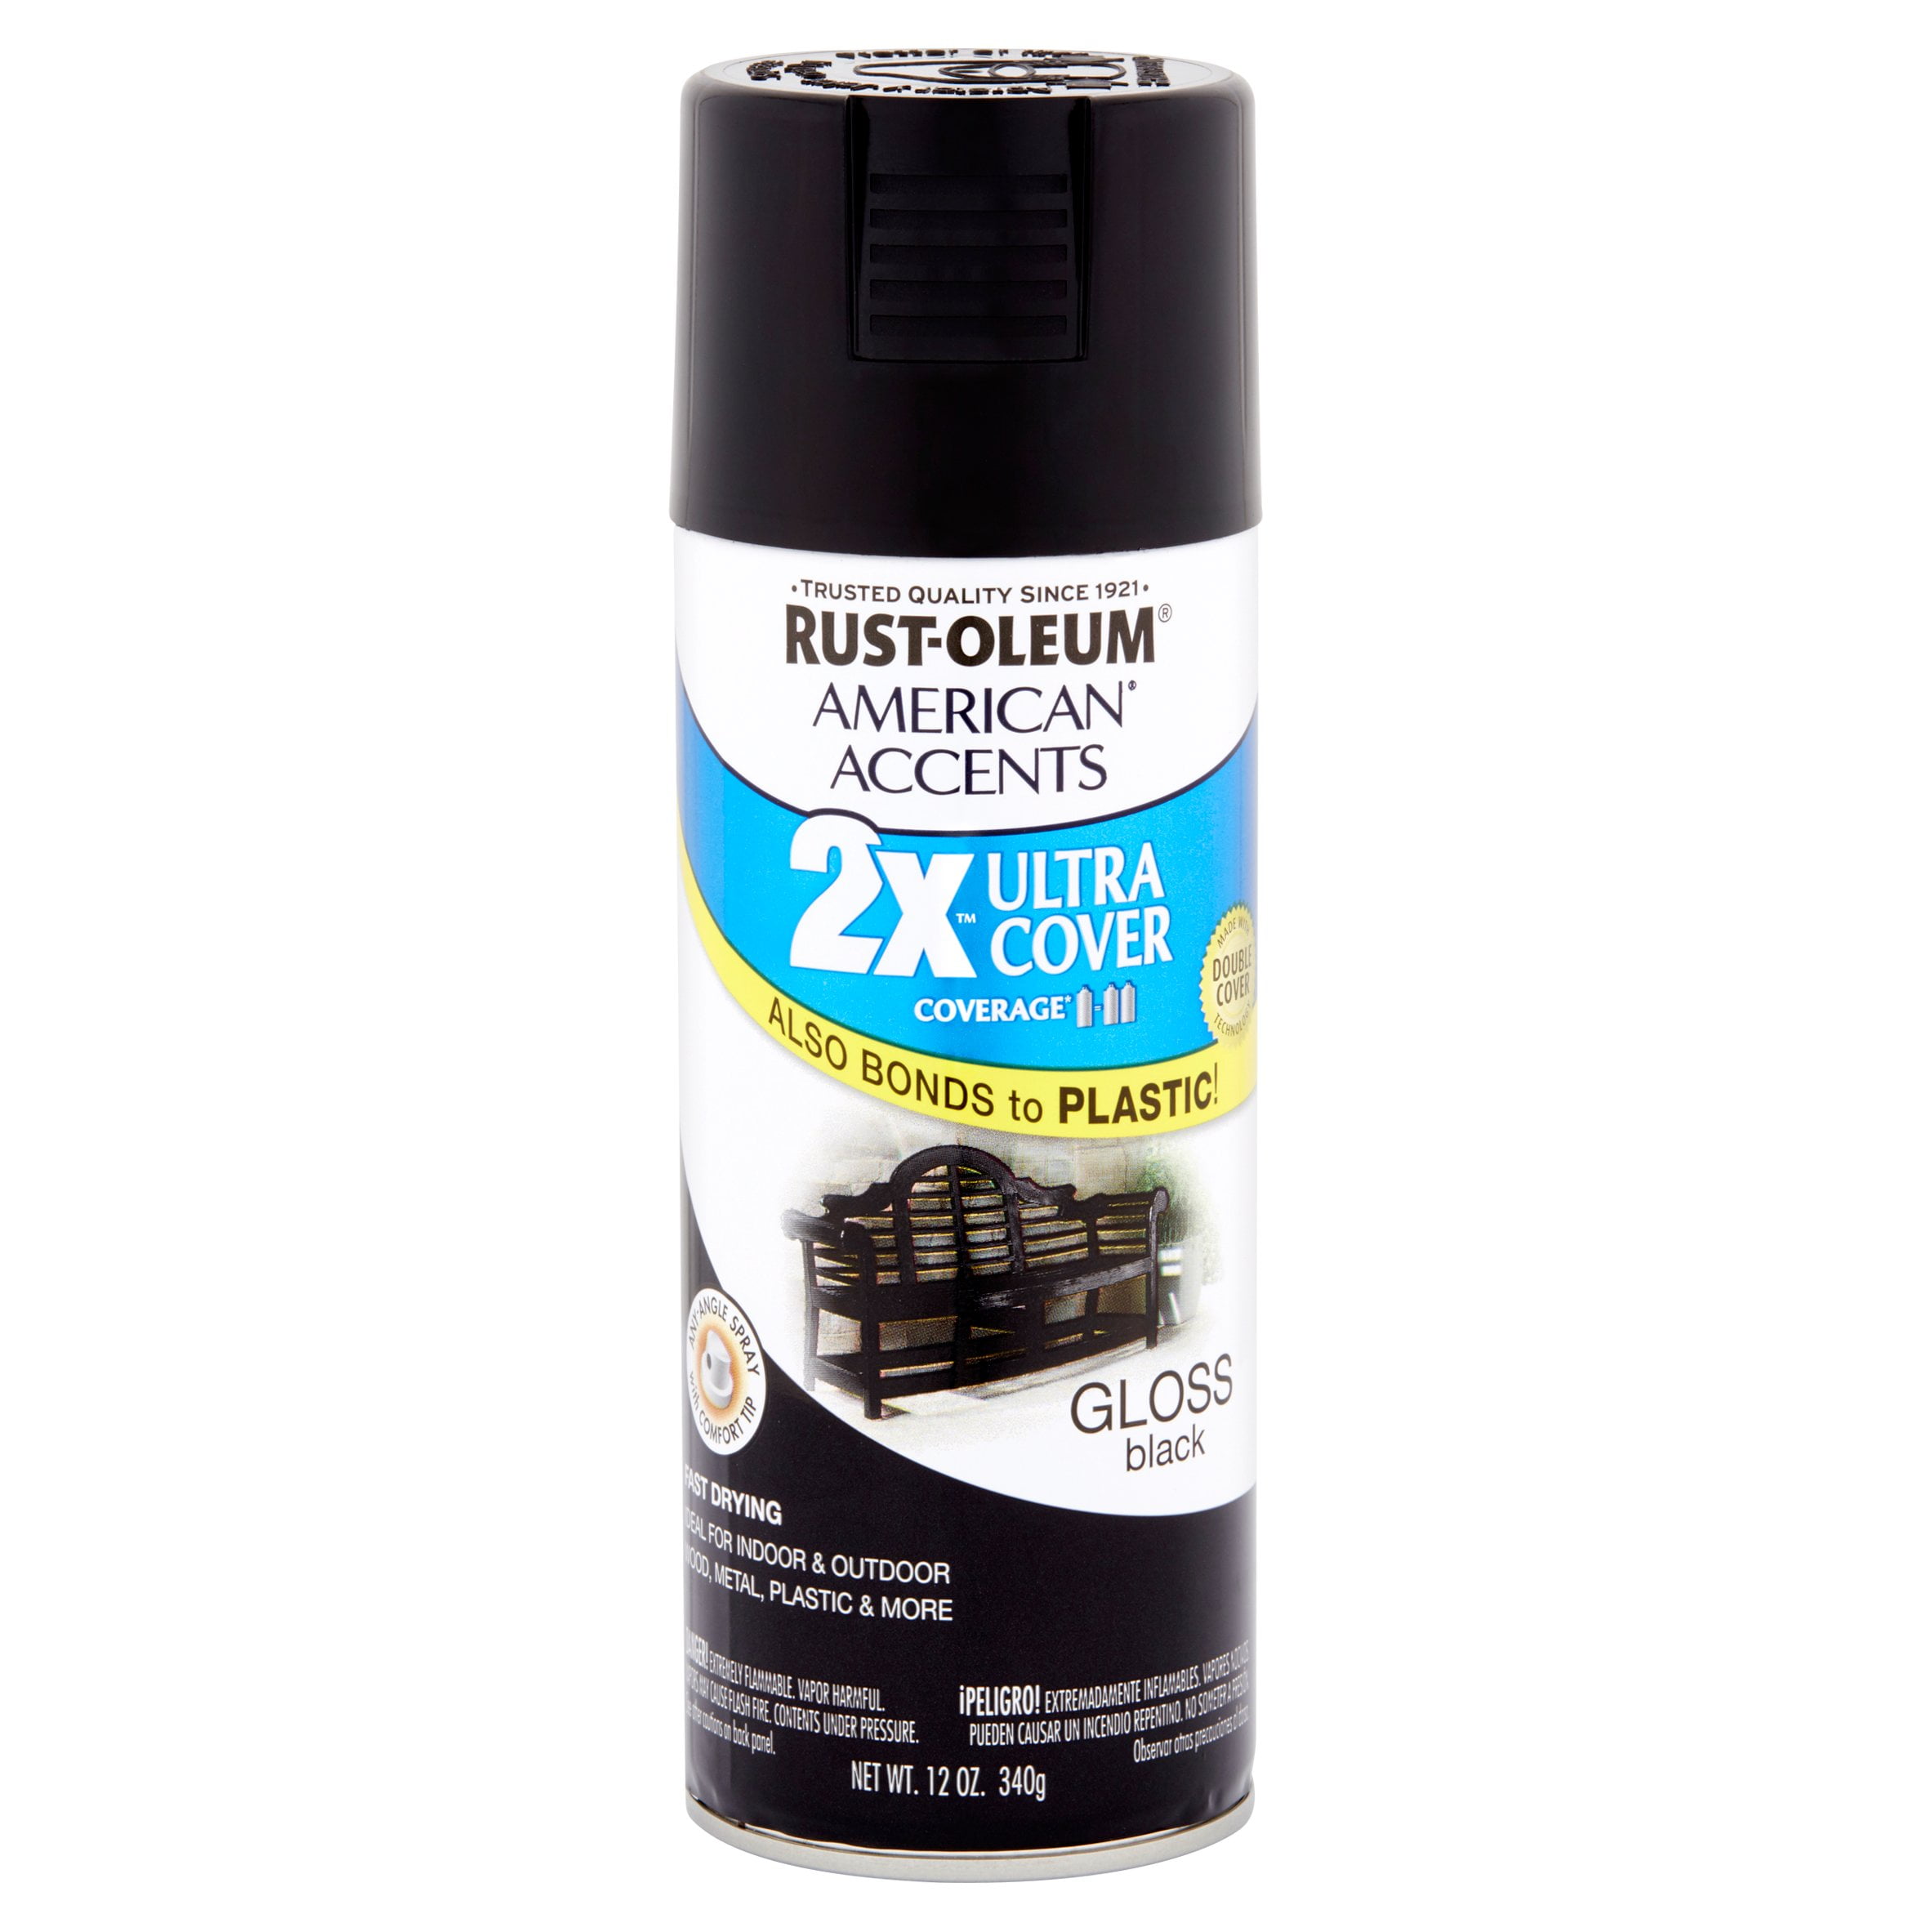 Rust Oleum American Accents Ultra Cover 2X Gloss Black Spray Paint